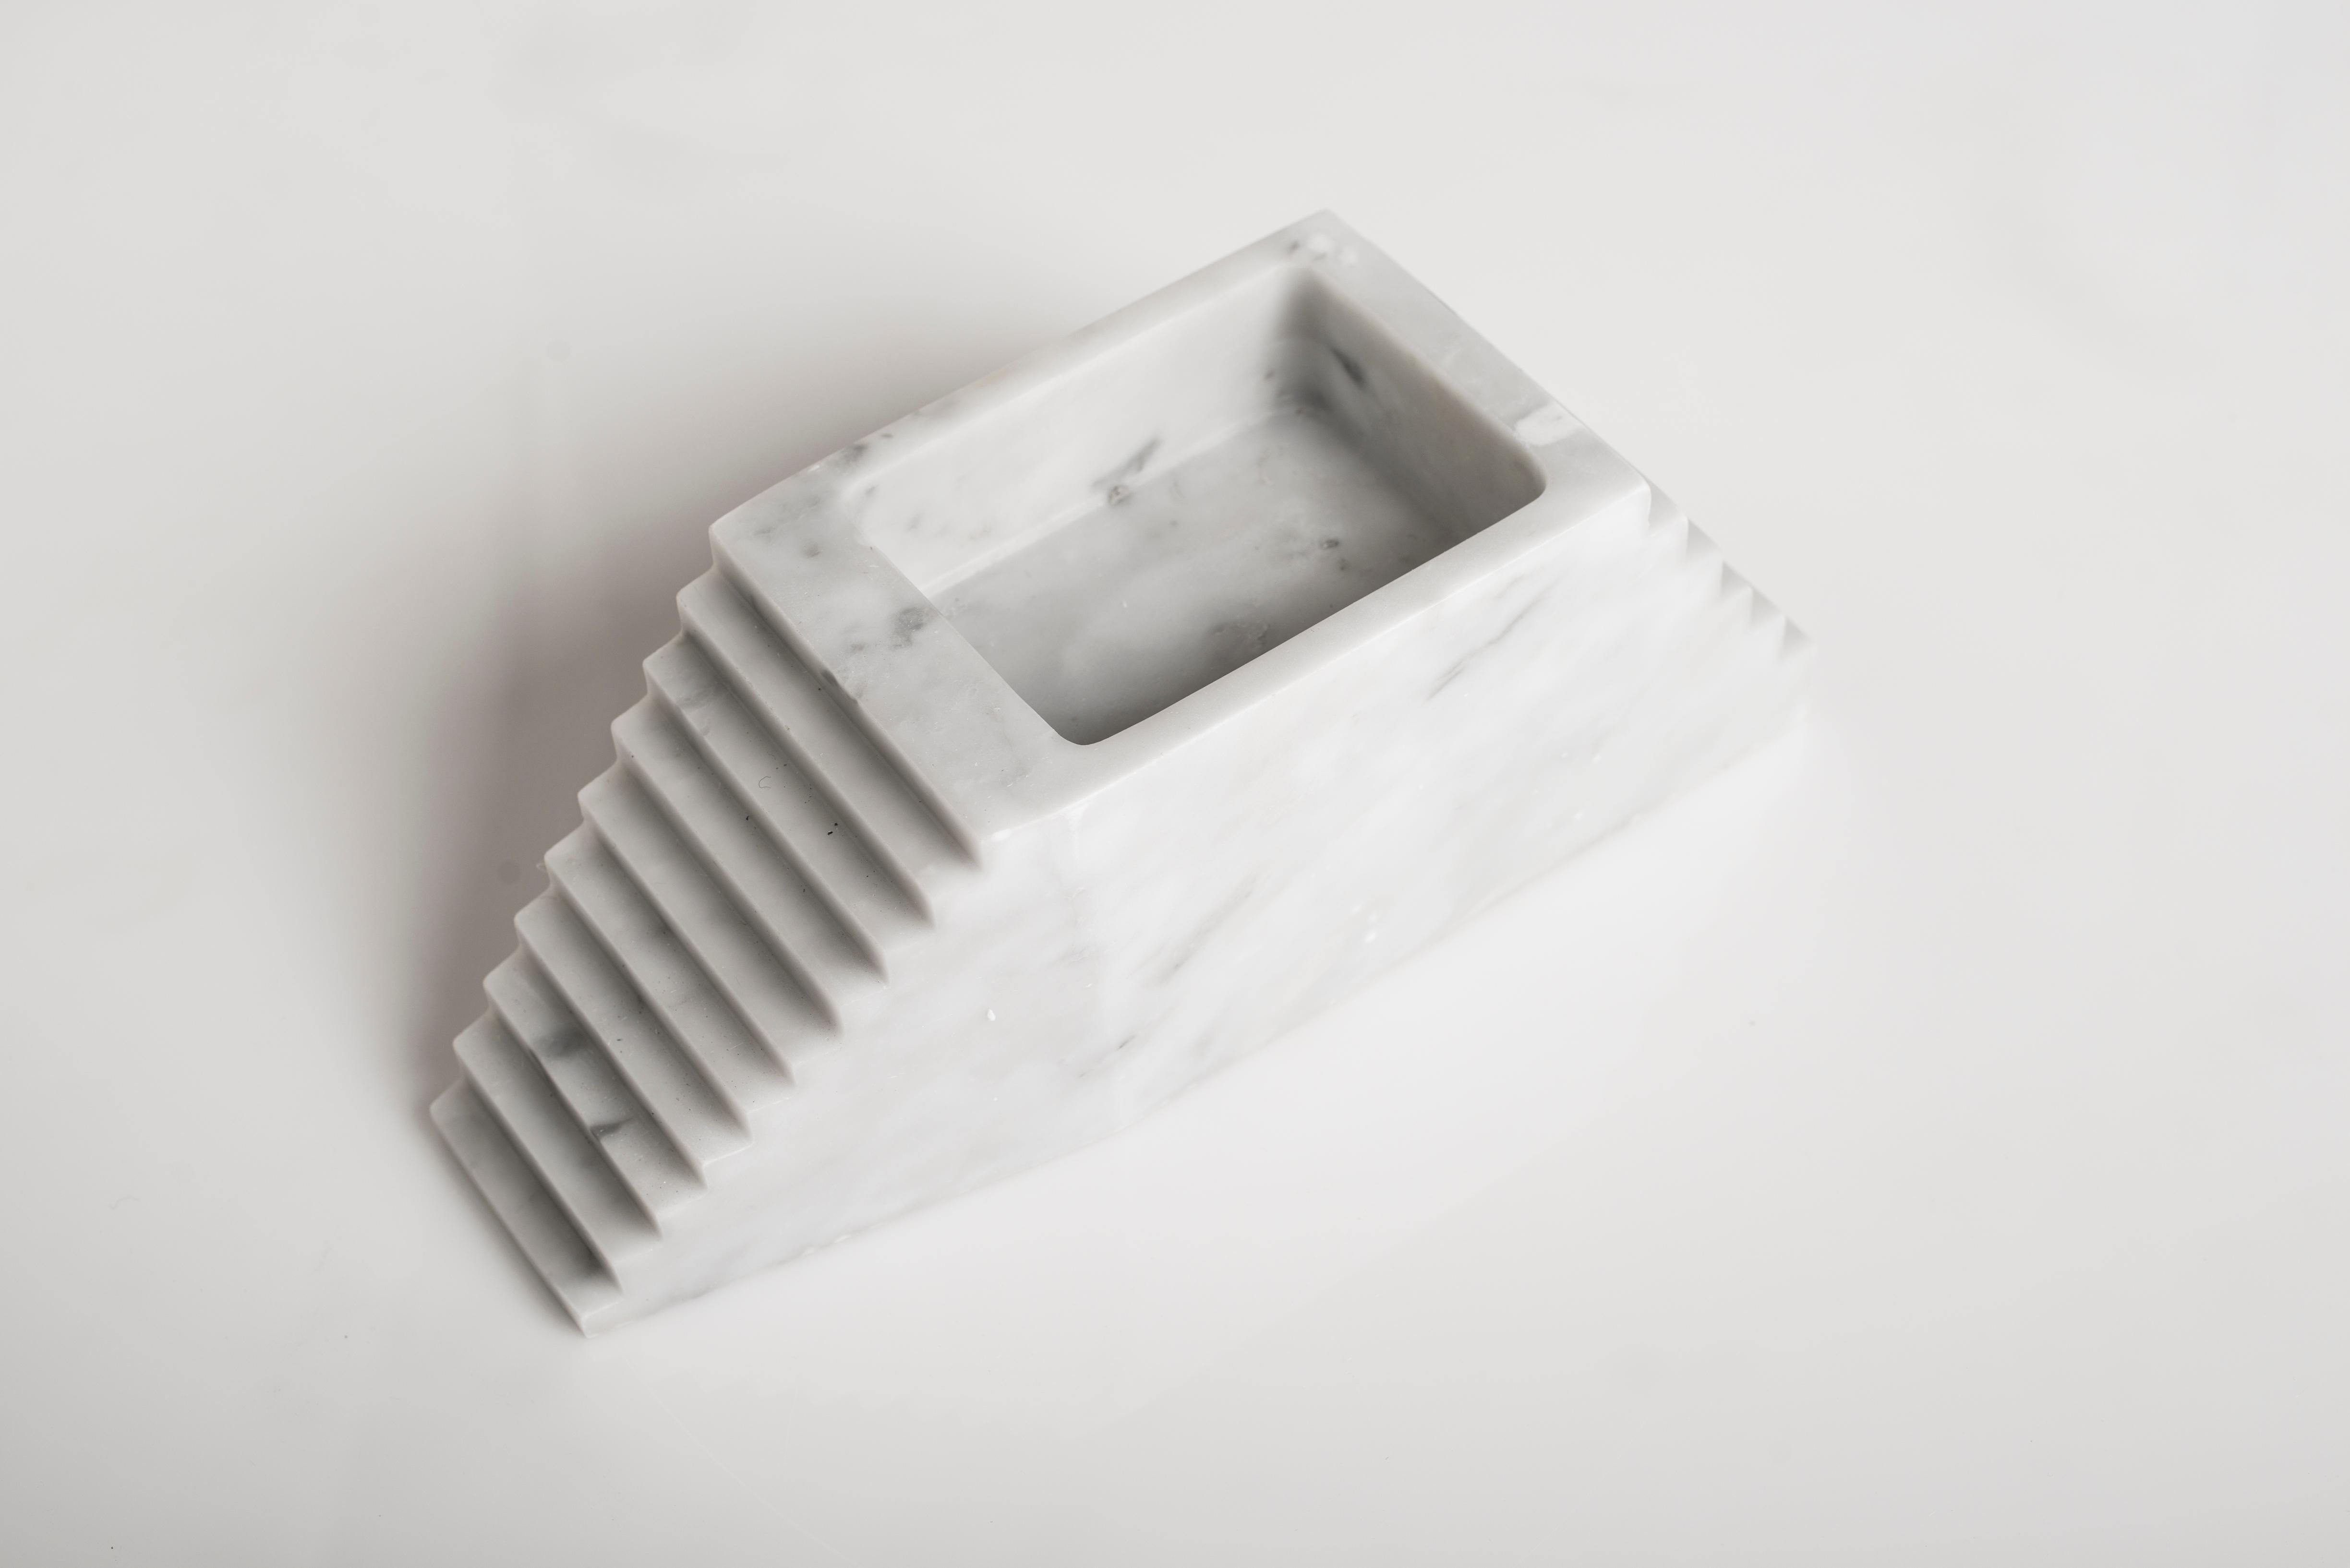 Moscow sculpture by Carlo Massoud.
Handmade. 
Dimensions: D 10 x W 30 x H 10 cm. 
Materials: Carrara Marble.

Carlo Massoud’s work stems from his relentless questioning of social, political, cultural, and environmental norms. He often pushes